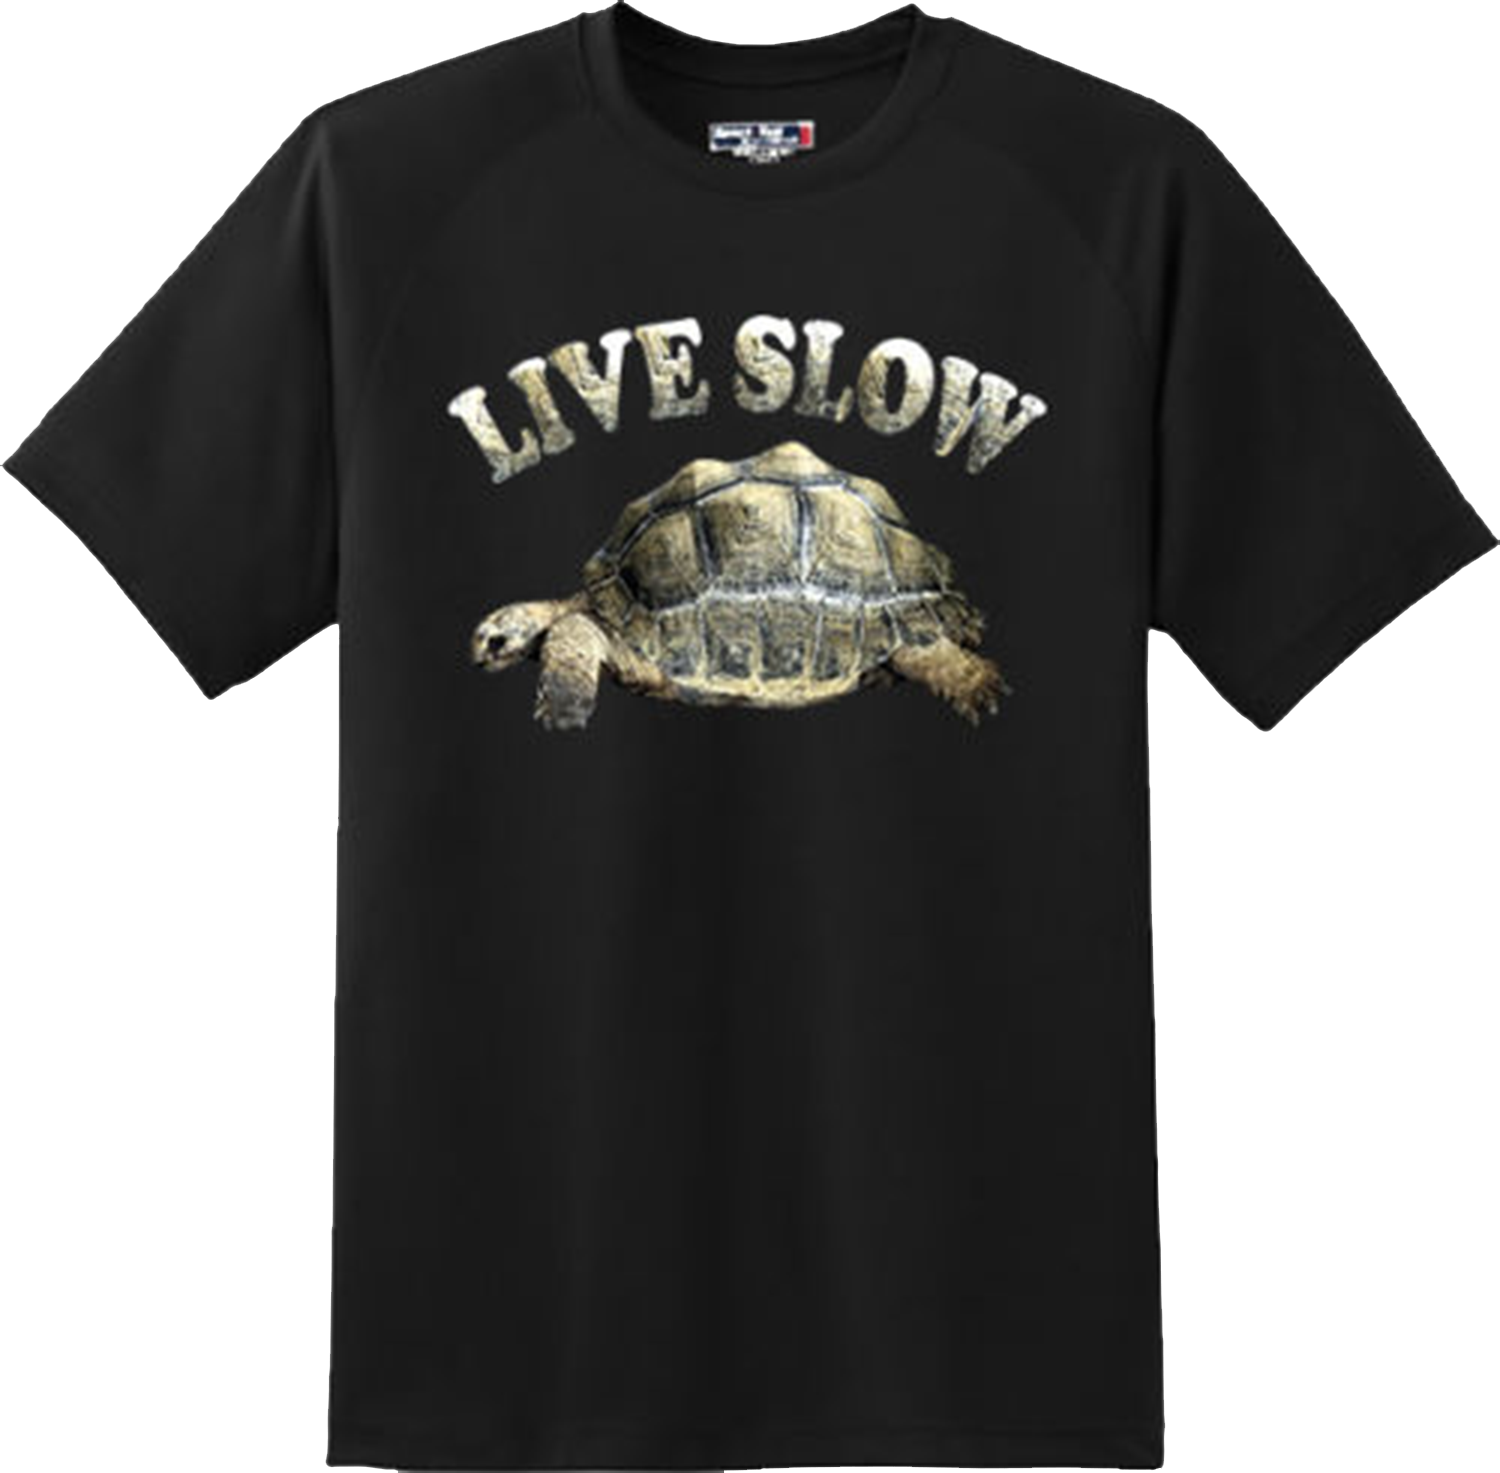 Funny Live Slow Turtle Tortoise Animal Holiday Humor T Shirt New Graphic Tee